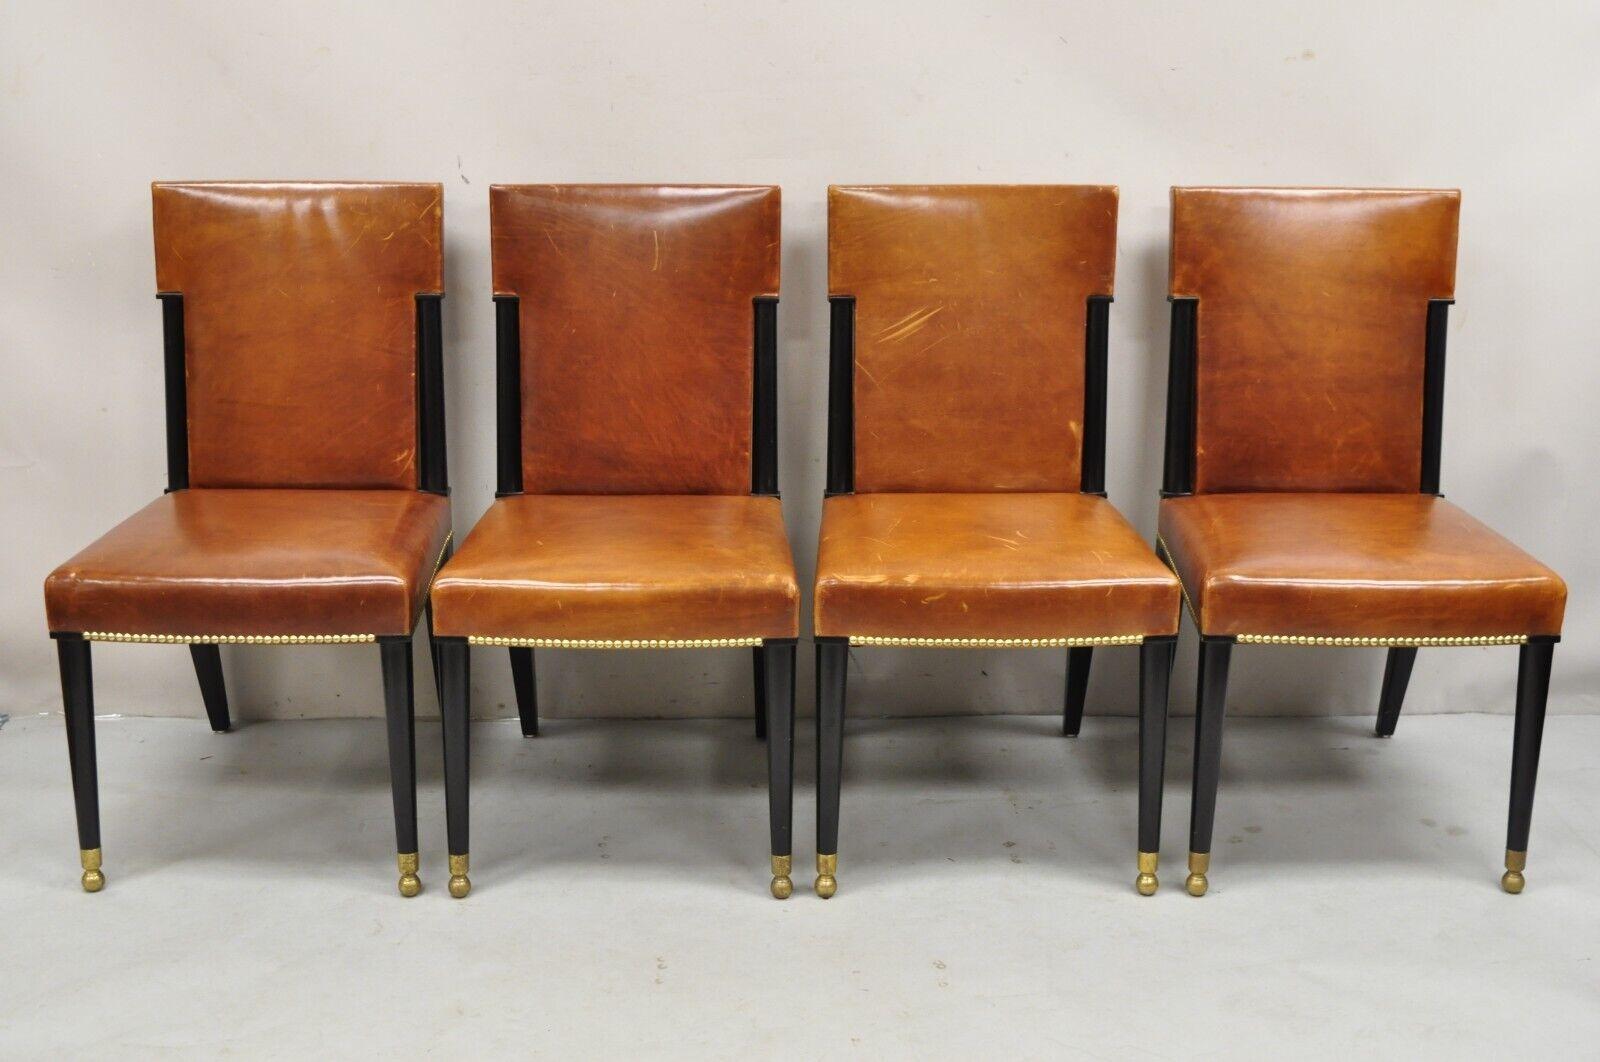 French Art Deco Style Brown Leather Ebonized Frame Dining Chairs - Set of 8 For Sale 4